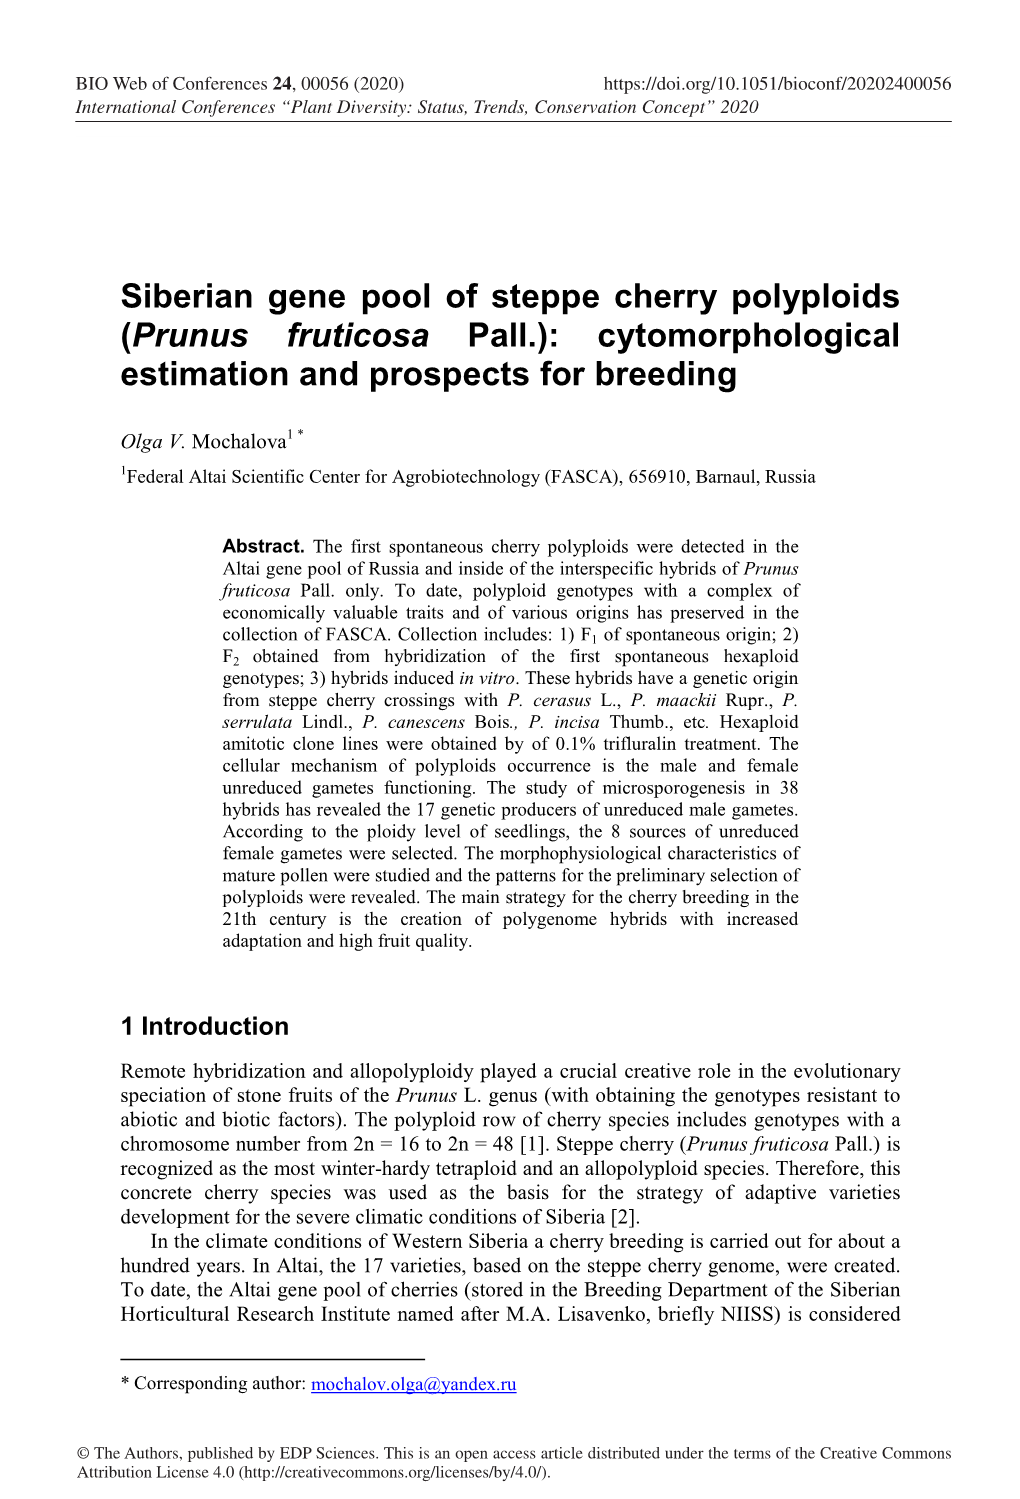 Siberian Gene Pool of Steppe Cherry Polyploids (Prunus Fruticosa Pall.): Cytomorphological Estimation and Prospects for Breeding